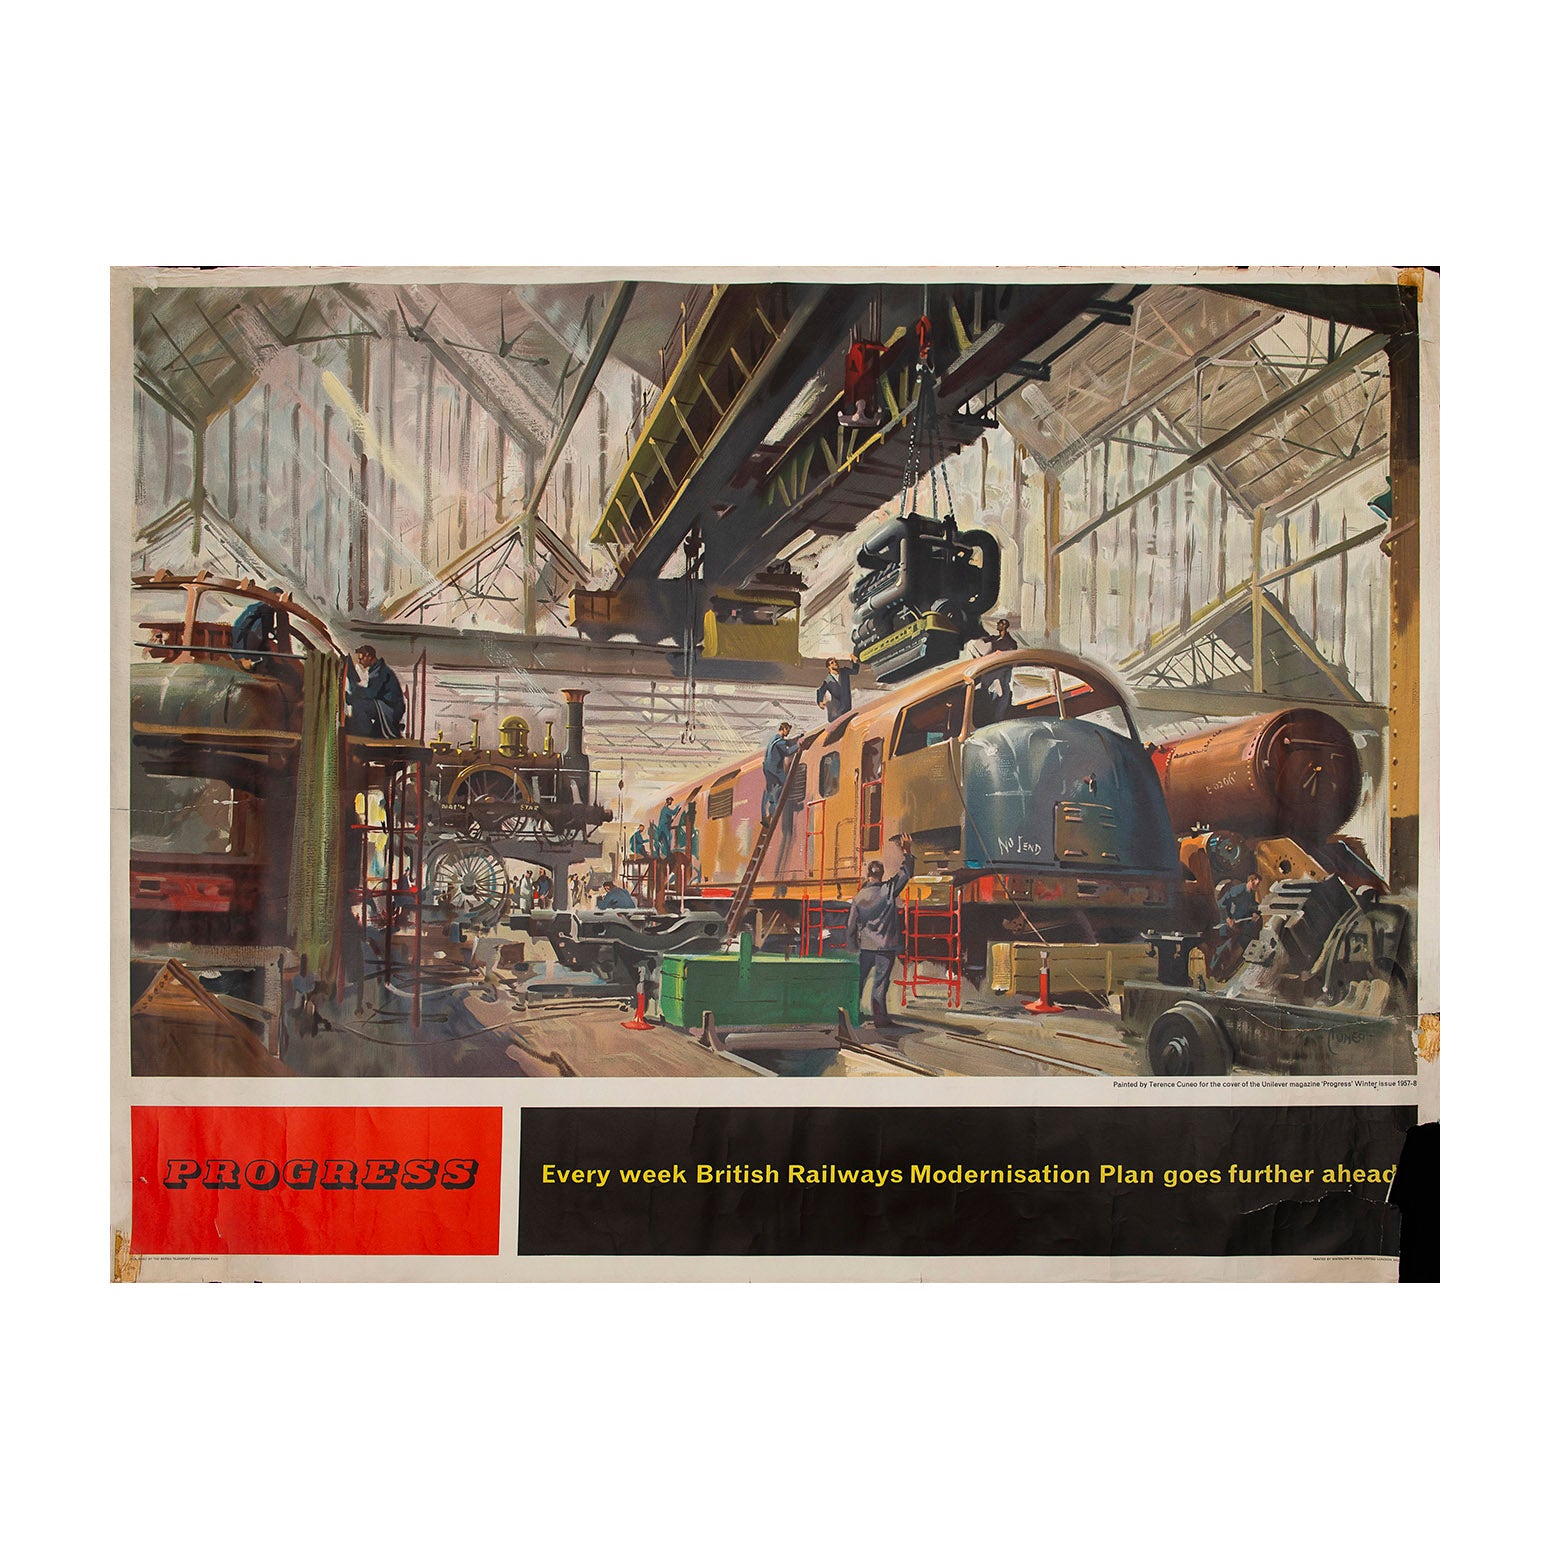 railway poster, <em>Progress,</em> by Terence Cuneo. The painting was commissioned by British Railways for the cover of the Unilever staff magazine (winter issue 1957) and also for poster display. It shows the production of new "Warship" diesel Locomotives at Swindon works, alongside much older steam locomotives